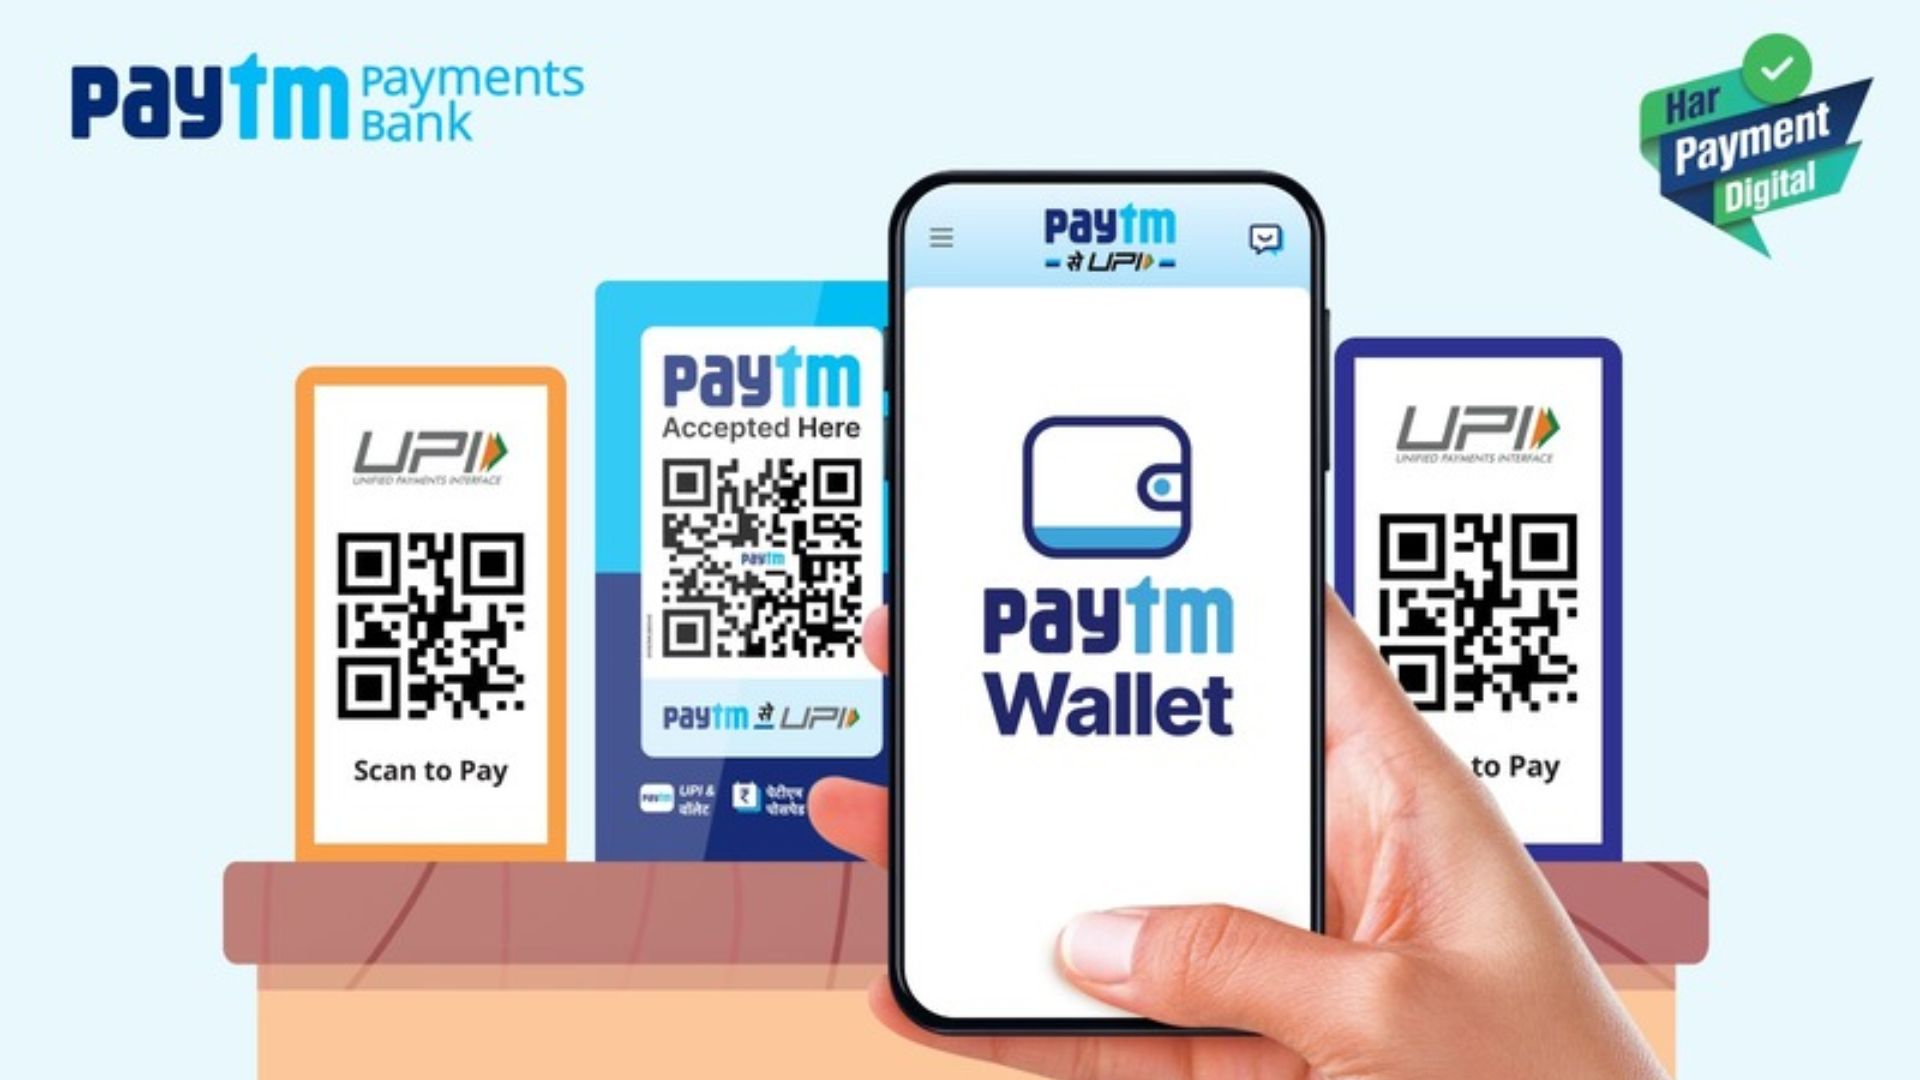 Paytm Transfers Nodal Account to Axis Bank, RBI Extends Unit Shutdown Deadline to March 15